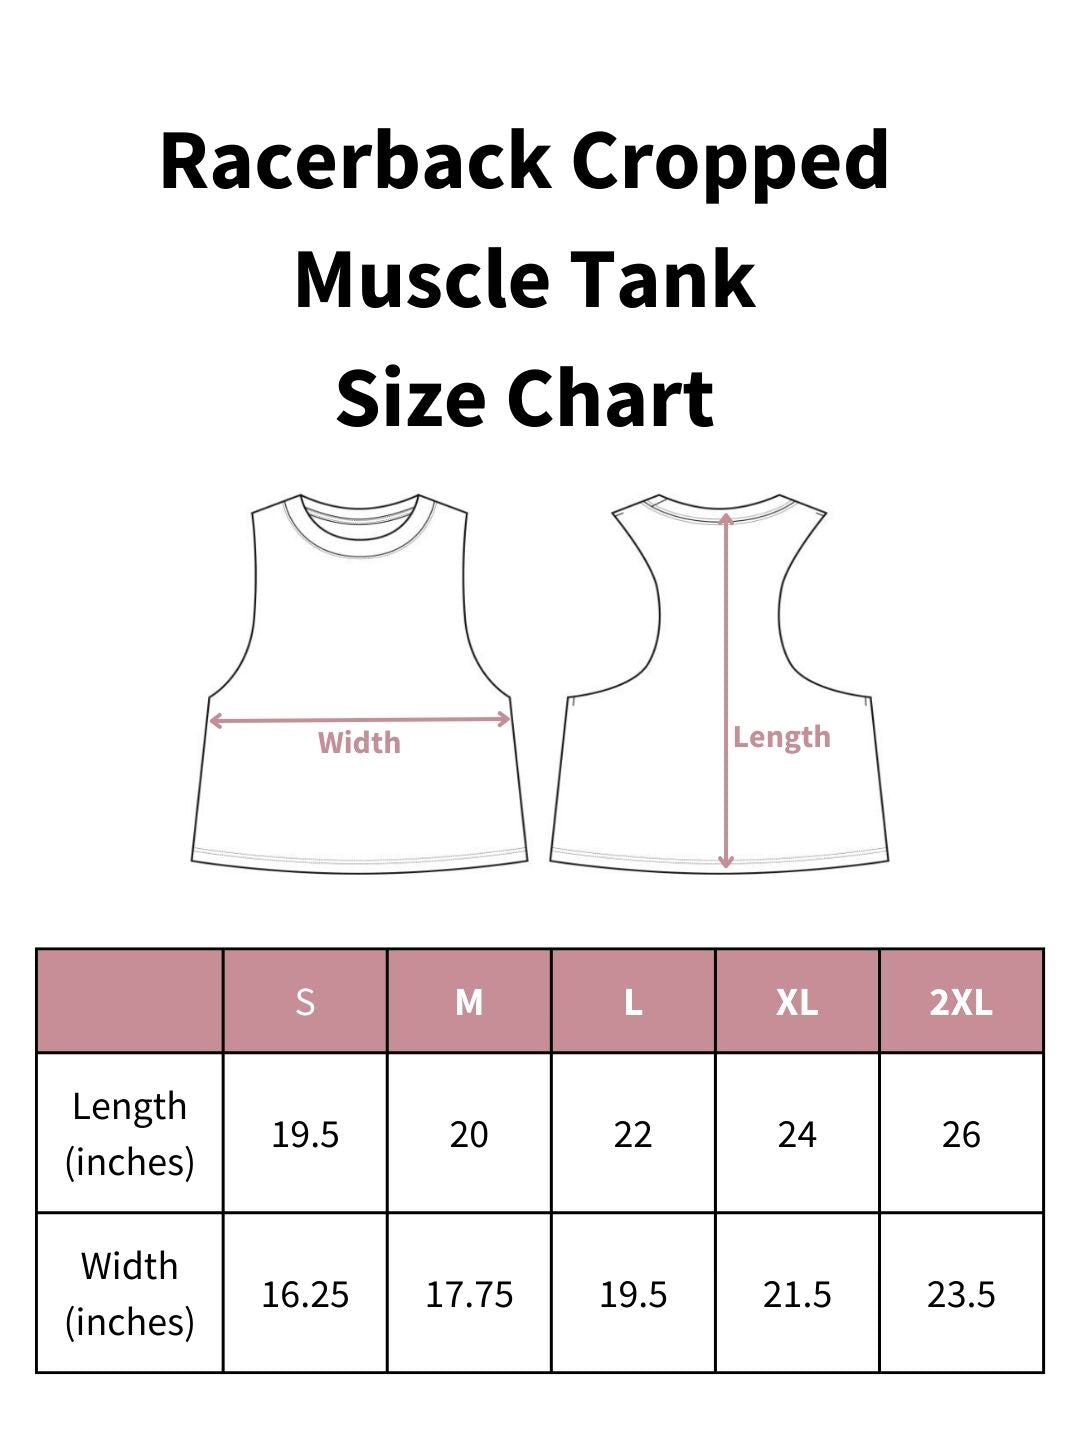 [CLEARANCE] ILY | Racerback Cropped Muscle Tank | 2XL